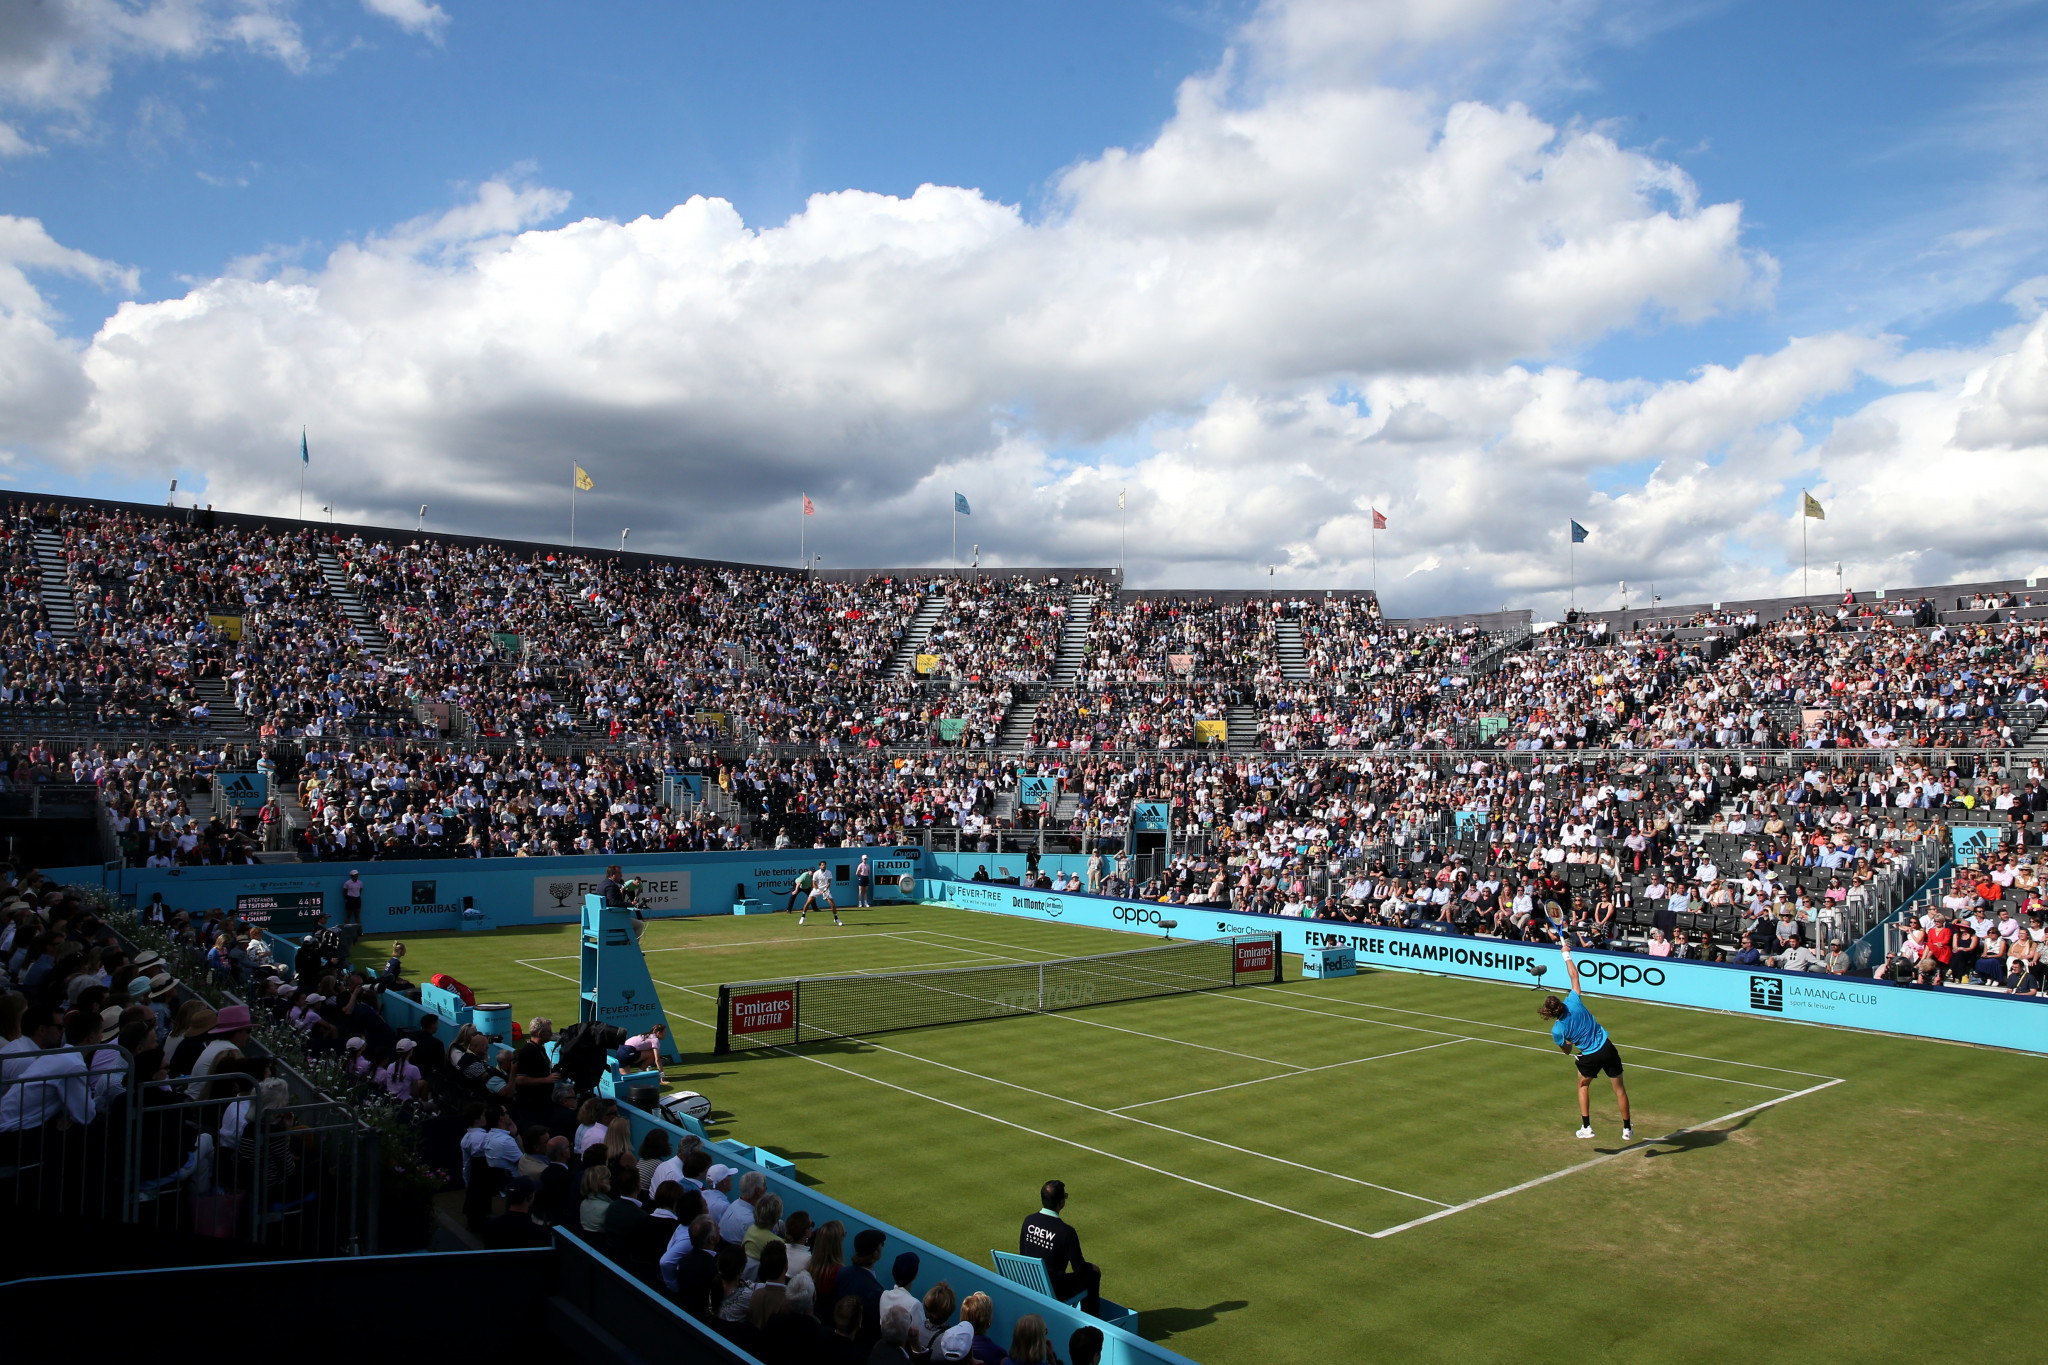 ATP ranking points will remain at the Queen's Club Championships and Eastbourne International, despite players from Russia and Belarus being banned ©Getty Images